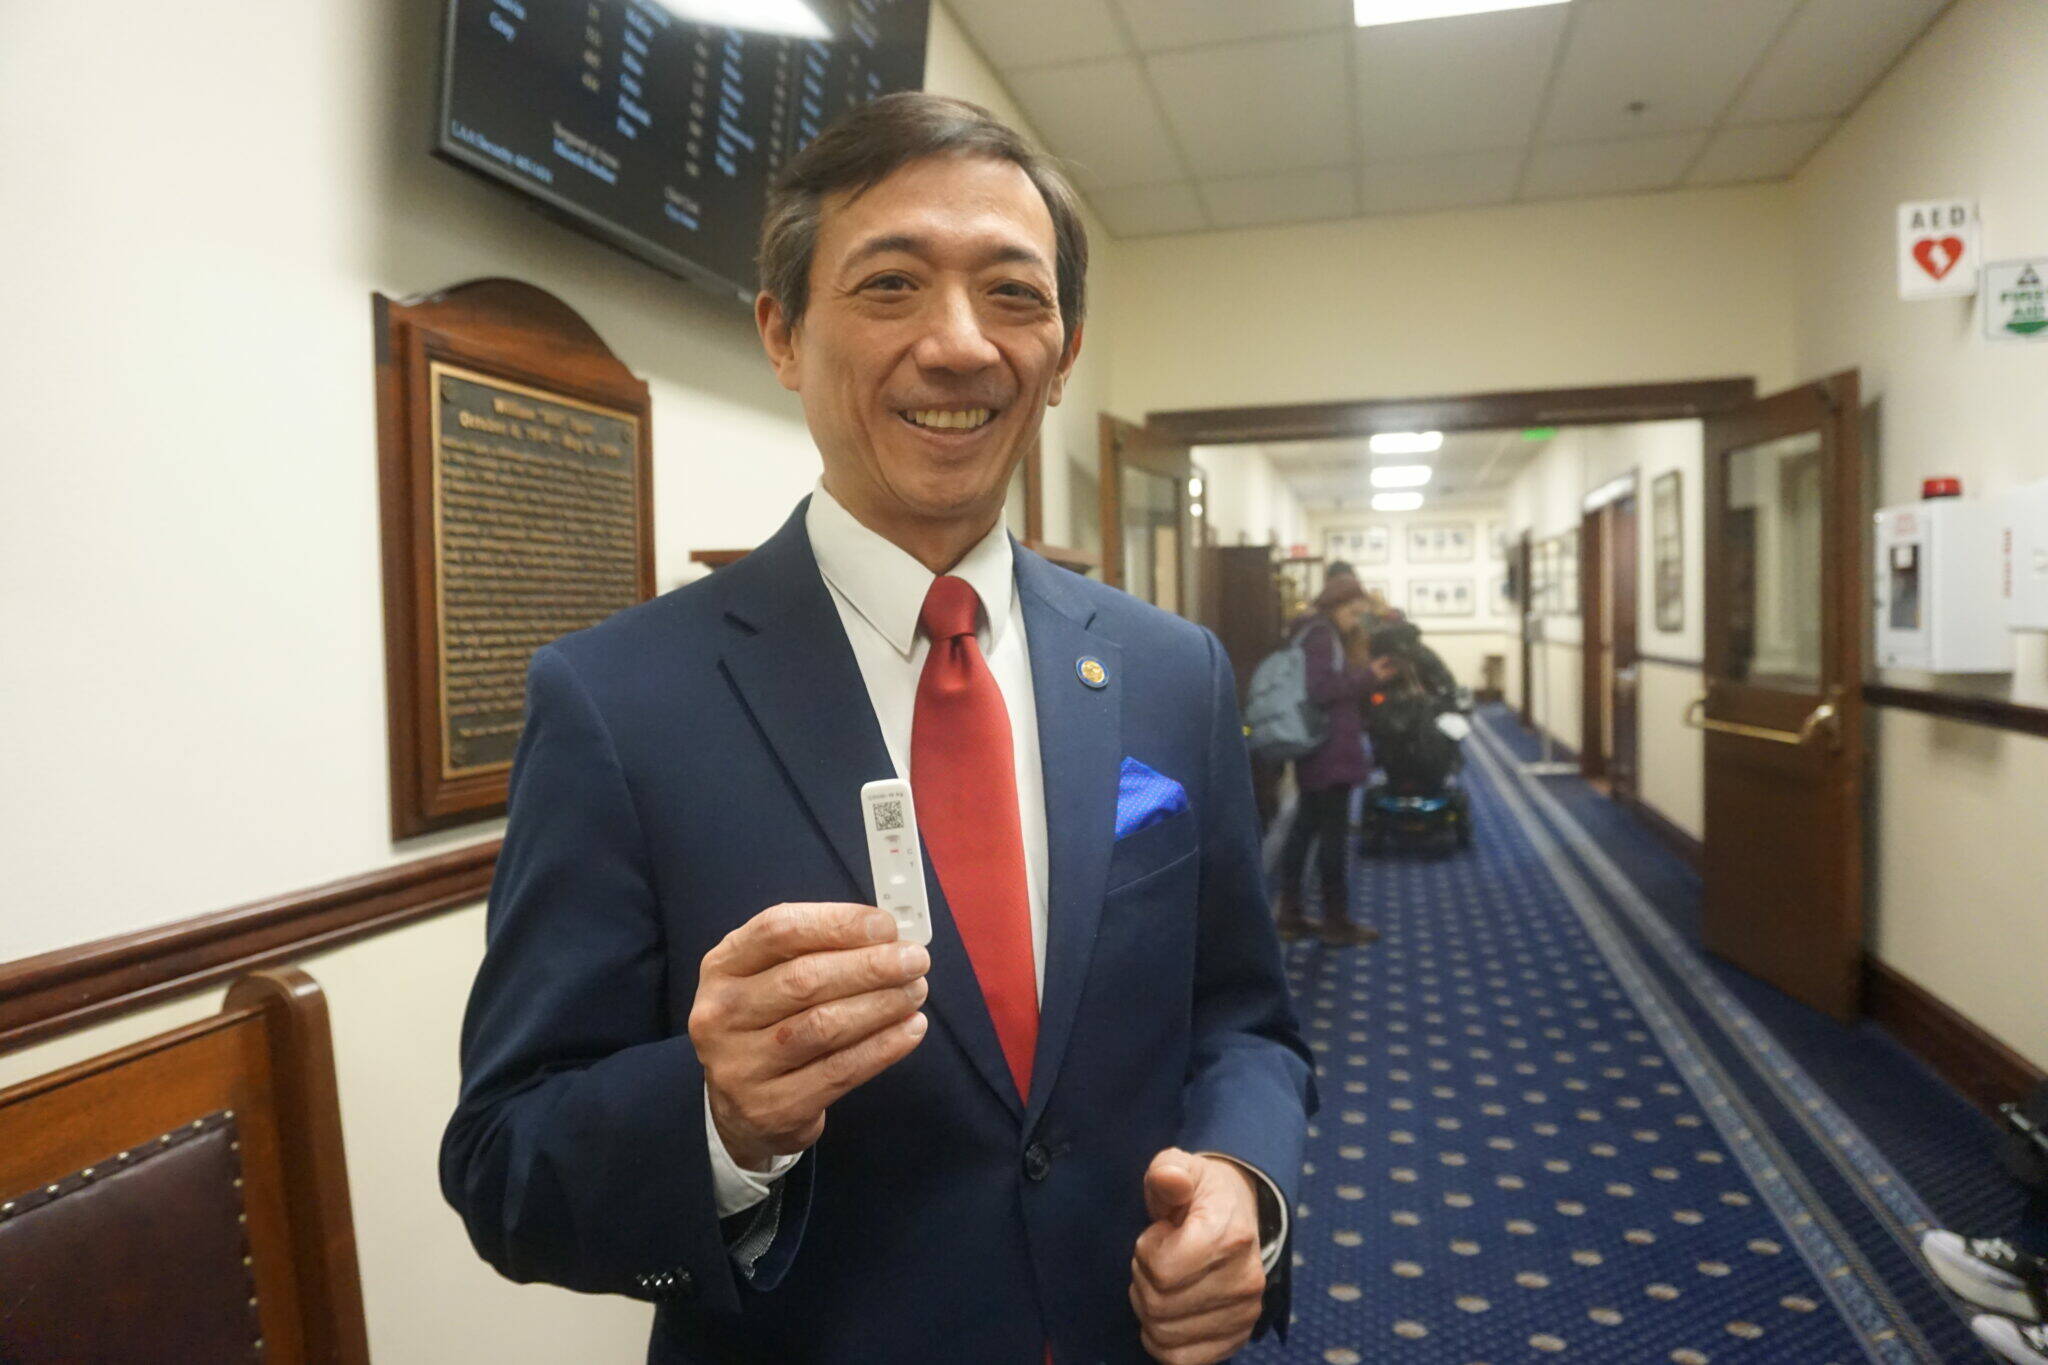 State Sen. Scott Kawasaki, in a hallway in the Alaska State Capitol on Feb. 16 holds up the strip showing he has tested negative for COVID-19. Kawasaki said he opted to take a test that day. (Yereth Rosen / Alaska Beacon)